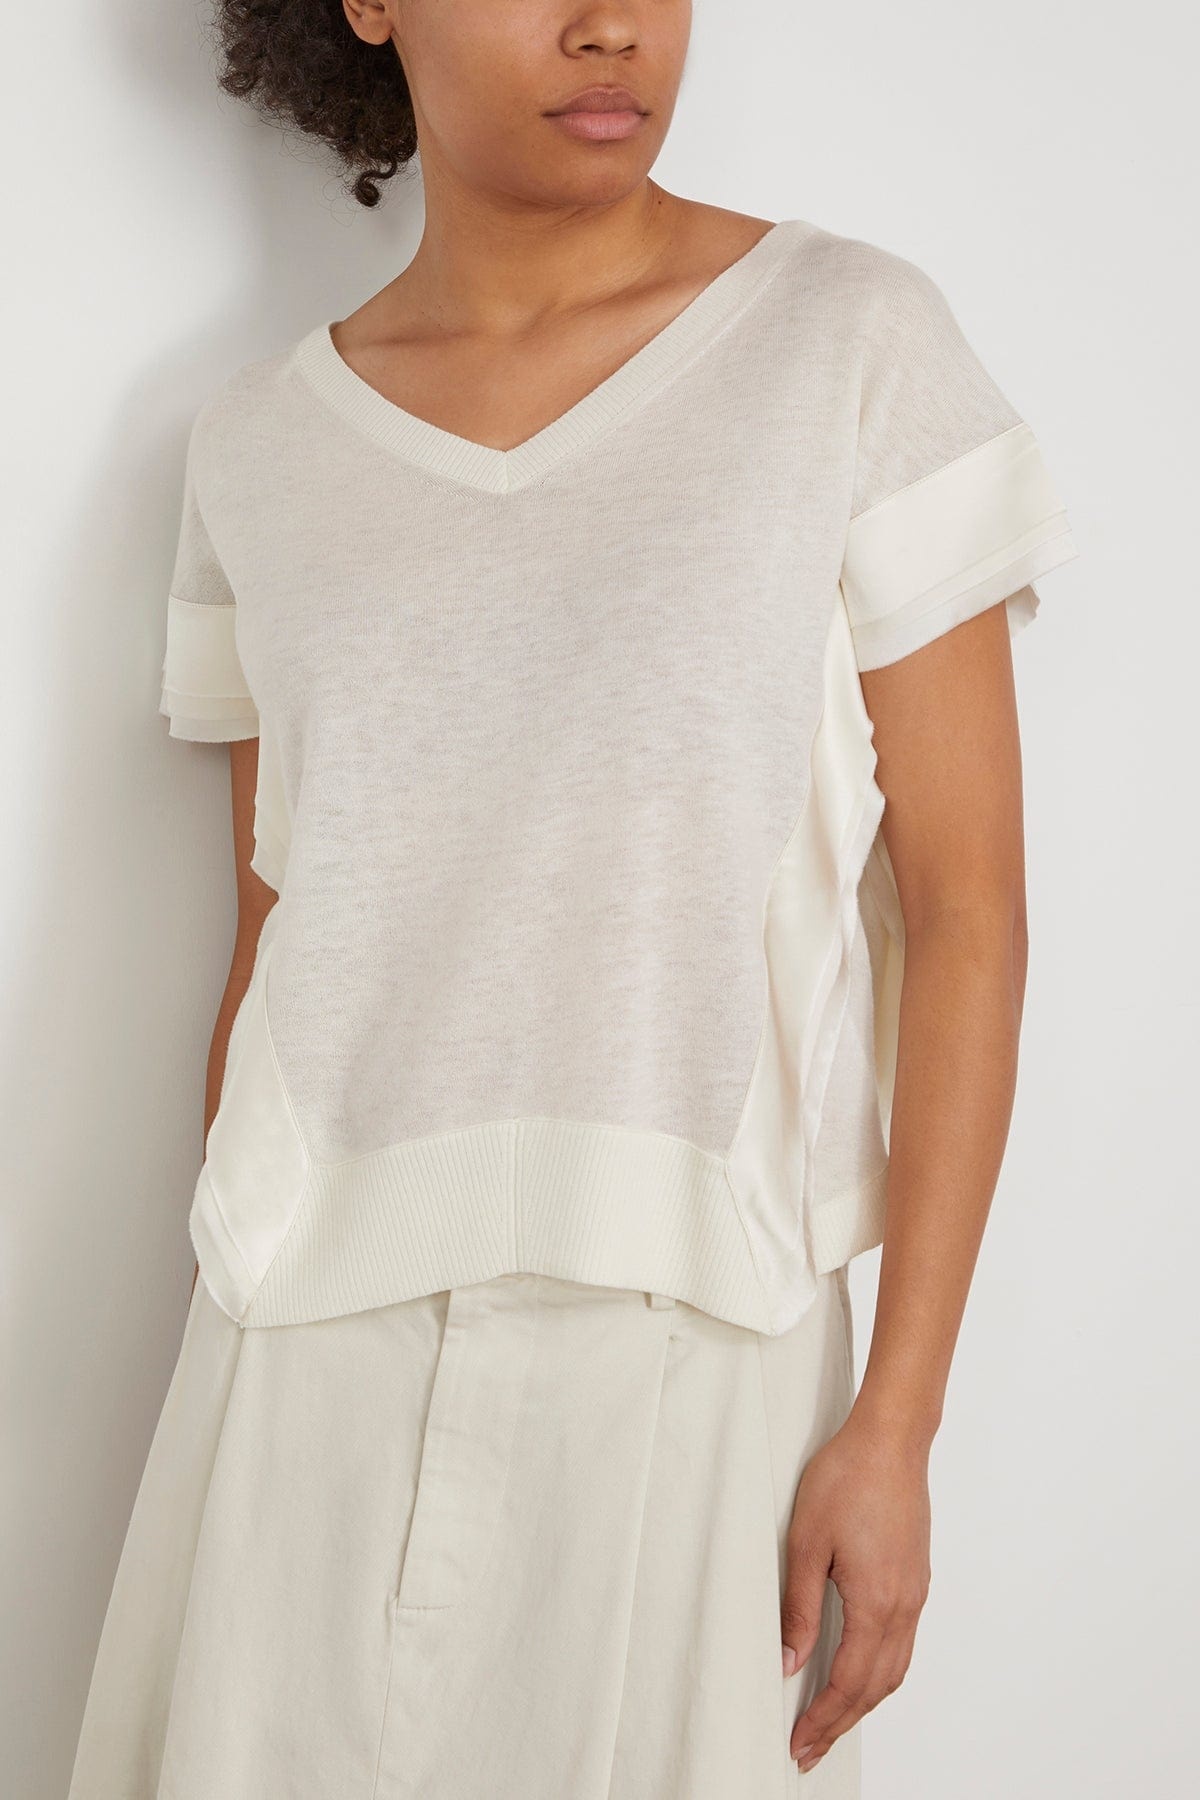 Delicate Statements Pullover in Shaded White - 3